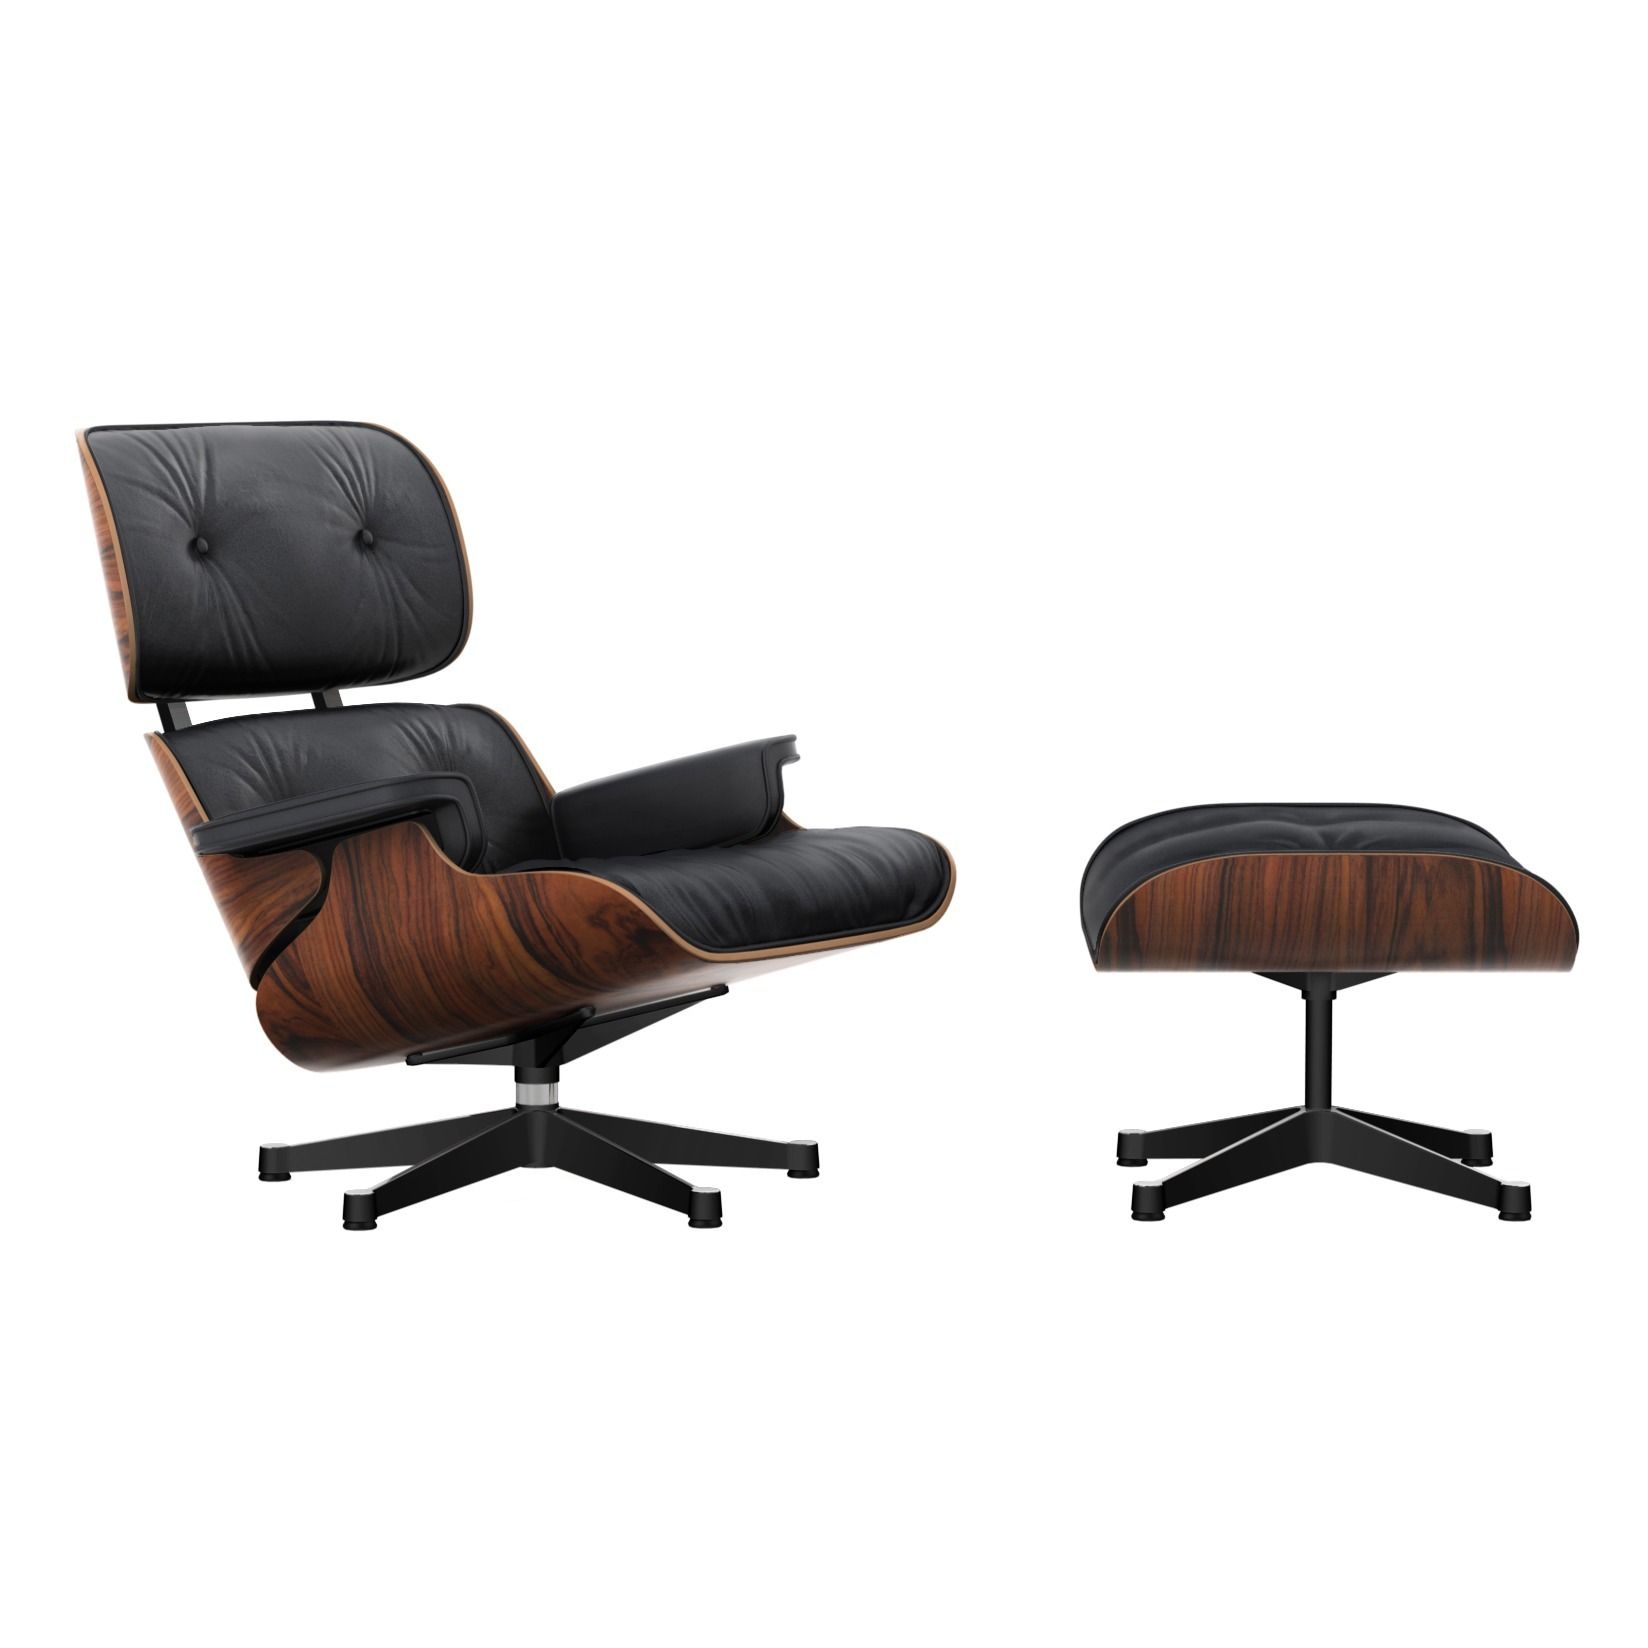 Charles And Ray Eames Lounge Chair And Ottoman 1956 - About Chair